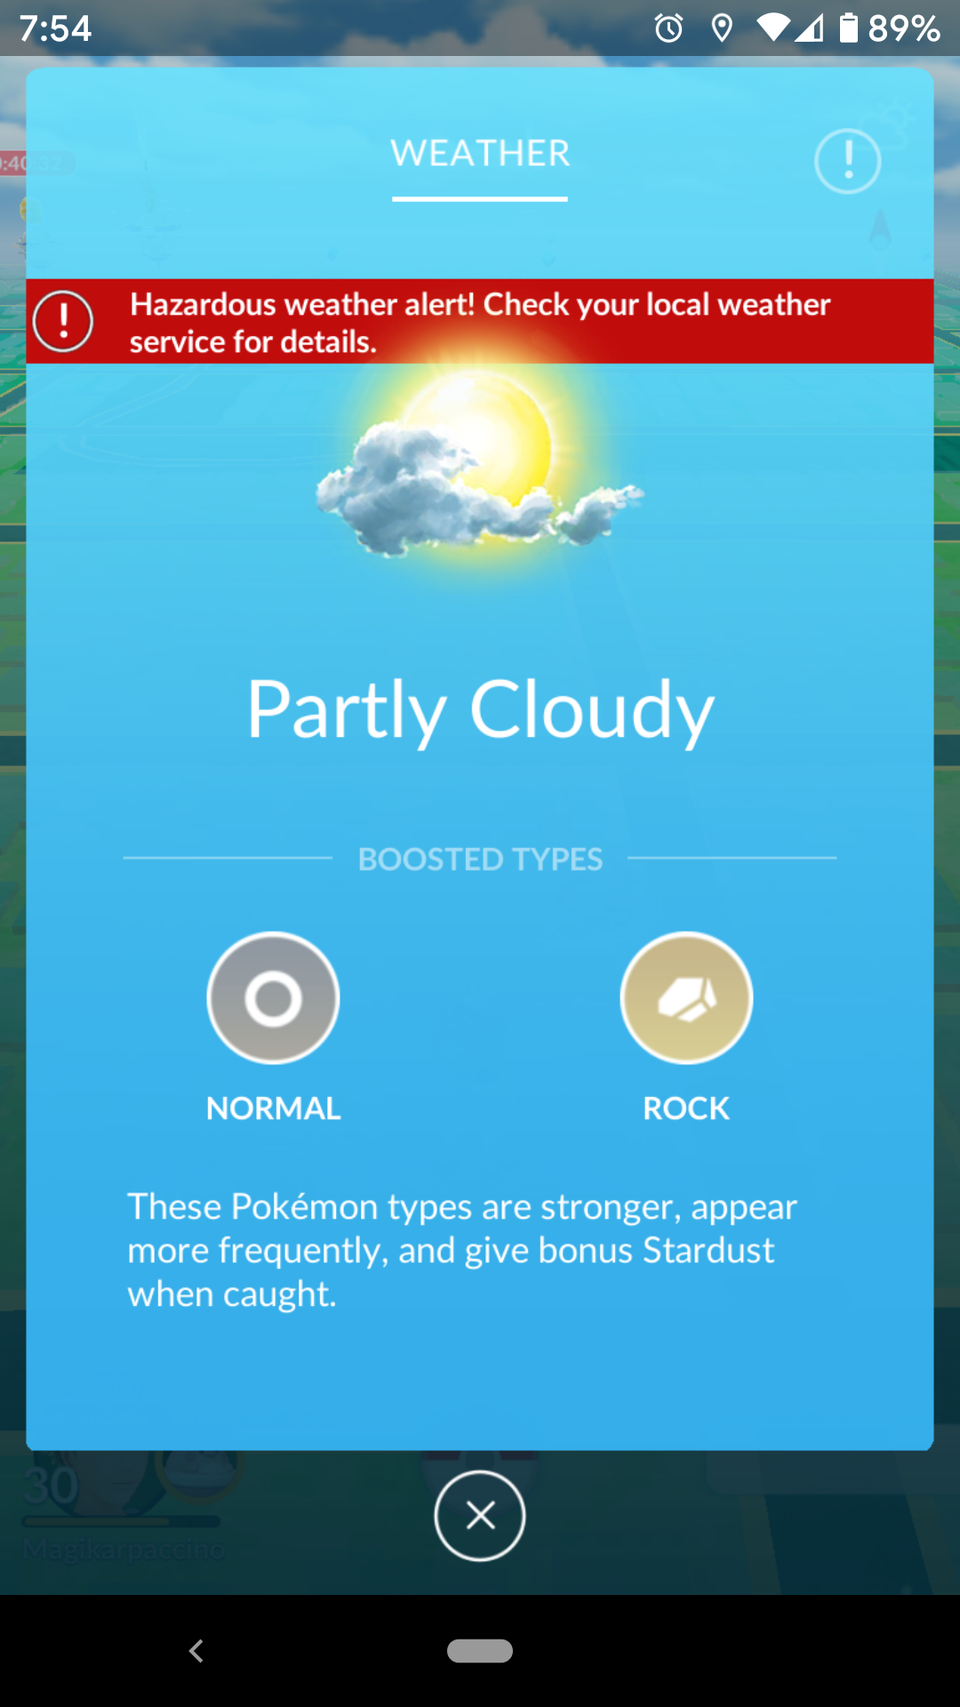 Oh no! Watch out for those partial clouds!(Seriously, though, there is a hazardous wind ...